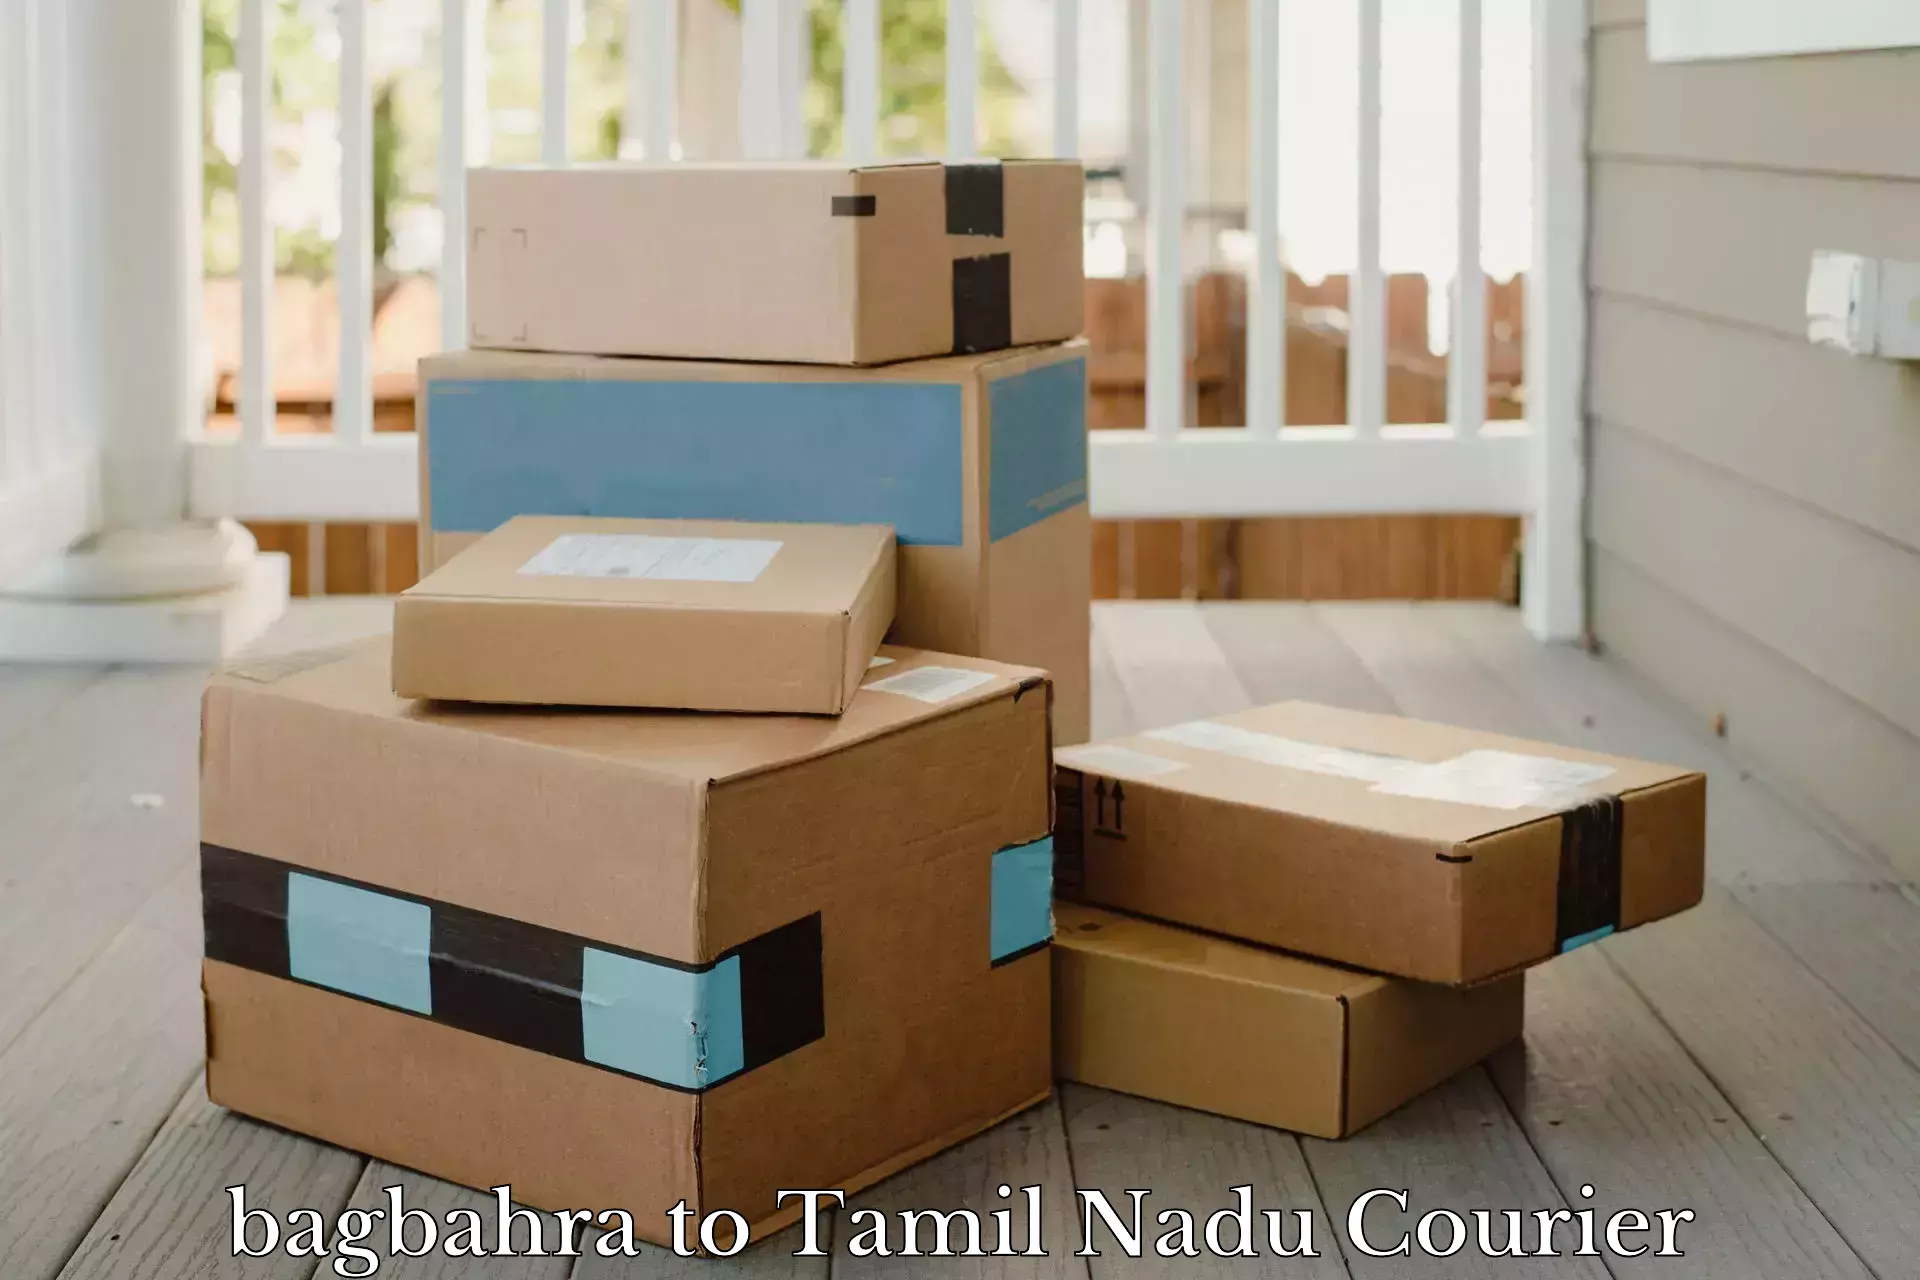 Discount courier rates bagbahra to Tuticorin Port